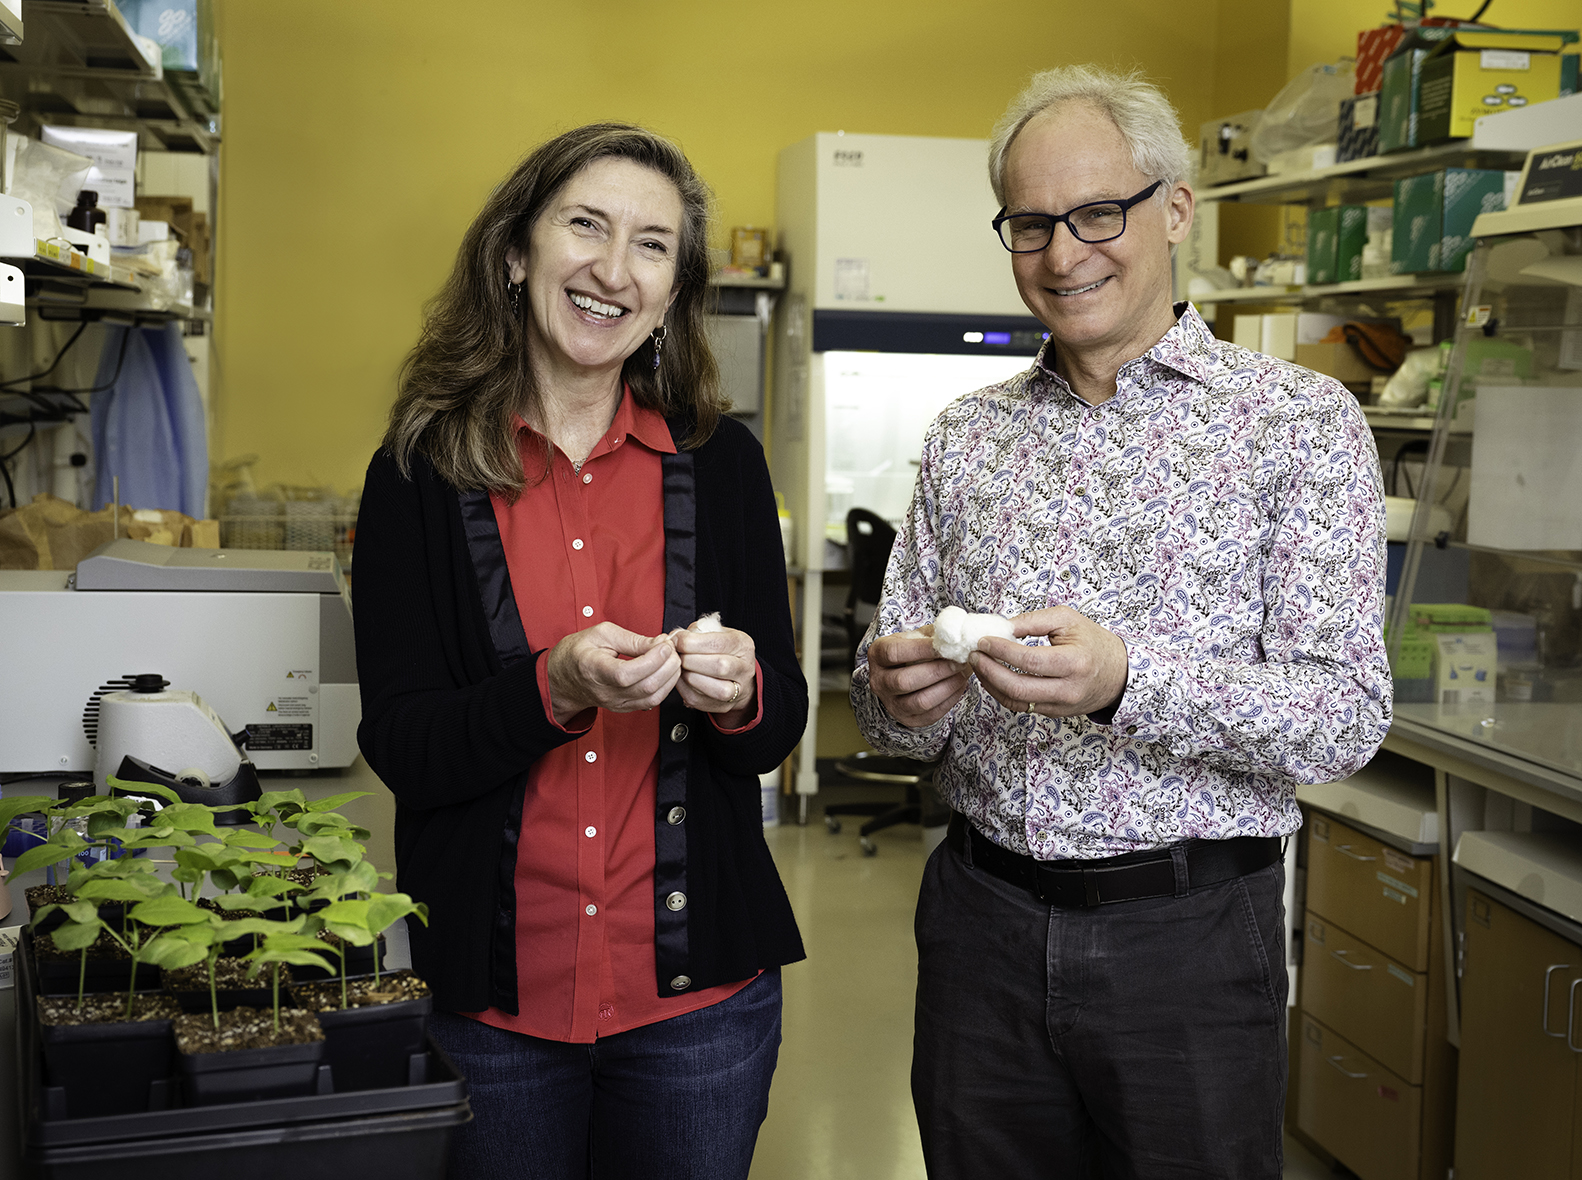 Photo of Brian G. Ayre and Roisin C. McGarry who are collaborating on a cotton research project.